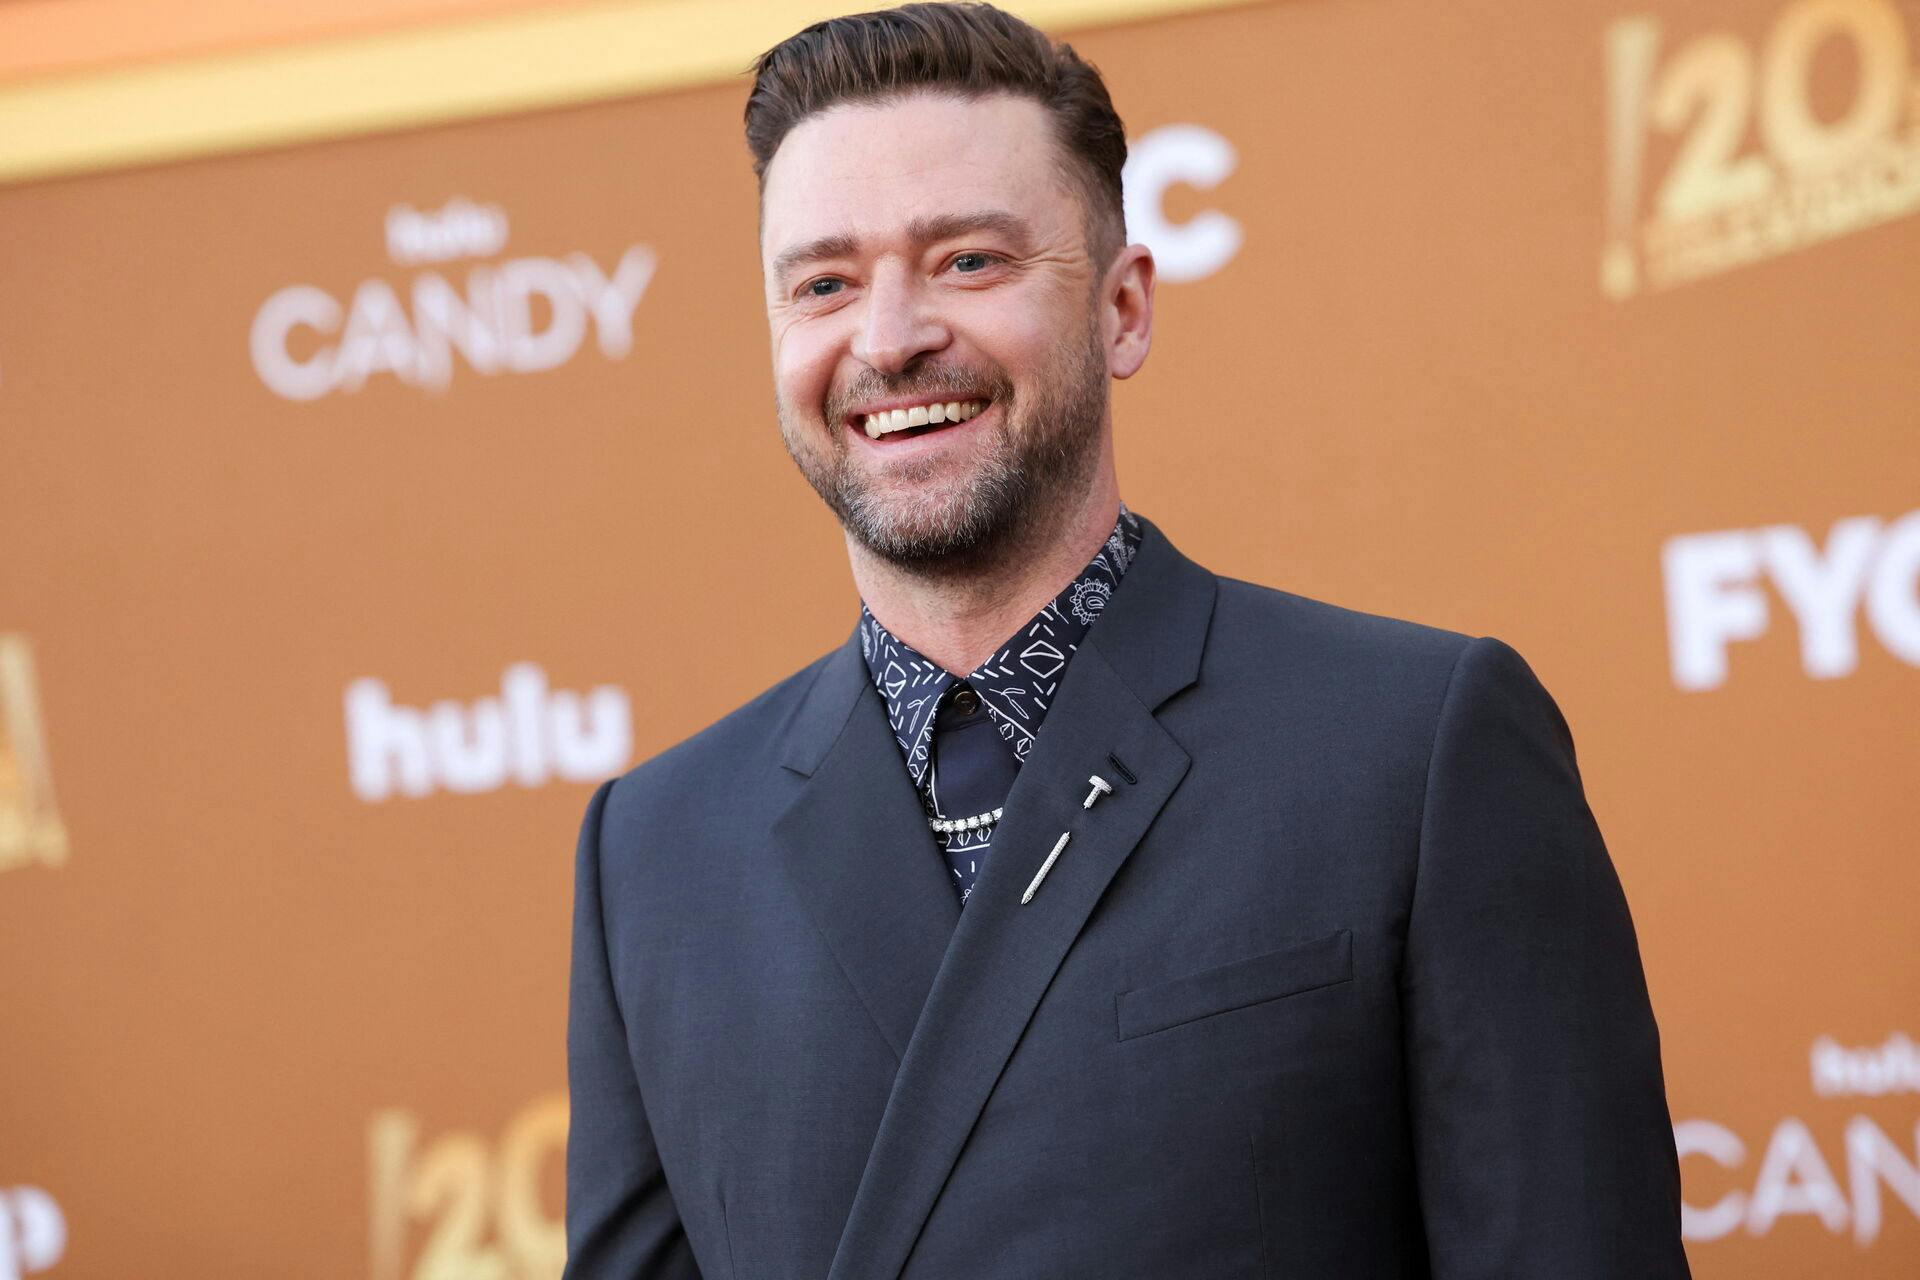 Singer Justin Timberlake attend an event for the television series Candy at El Capitan theatre in Los Angeles, California, U.S. May 9, 2022. REUTERS/Mario Anzuoni